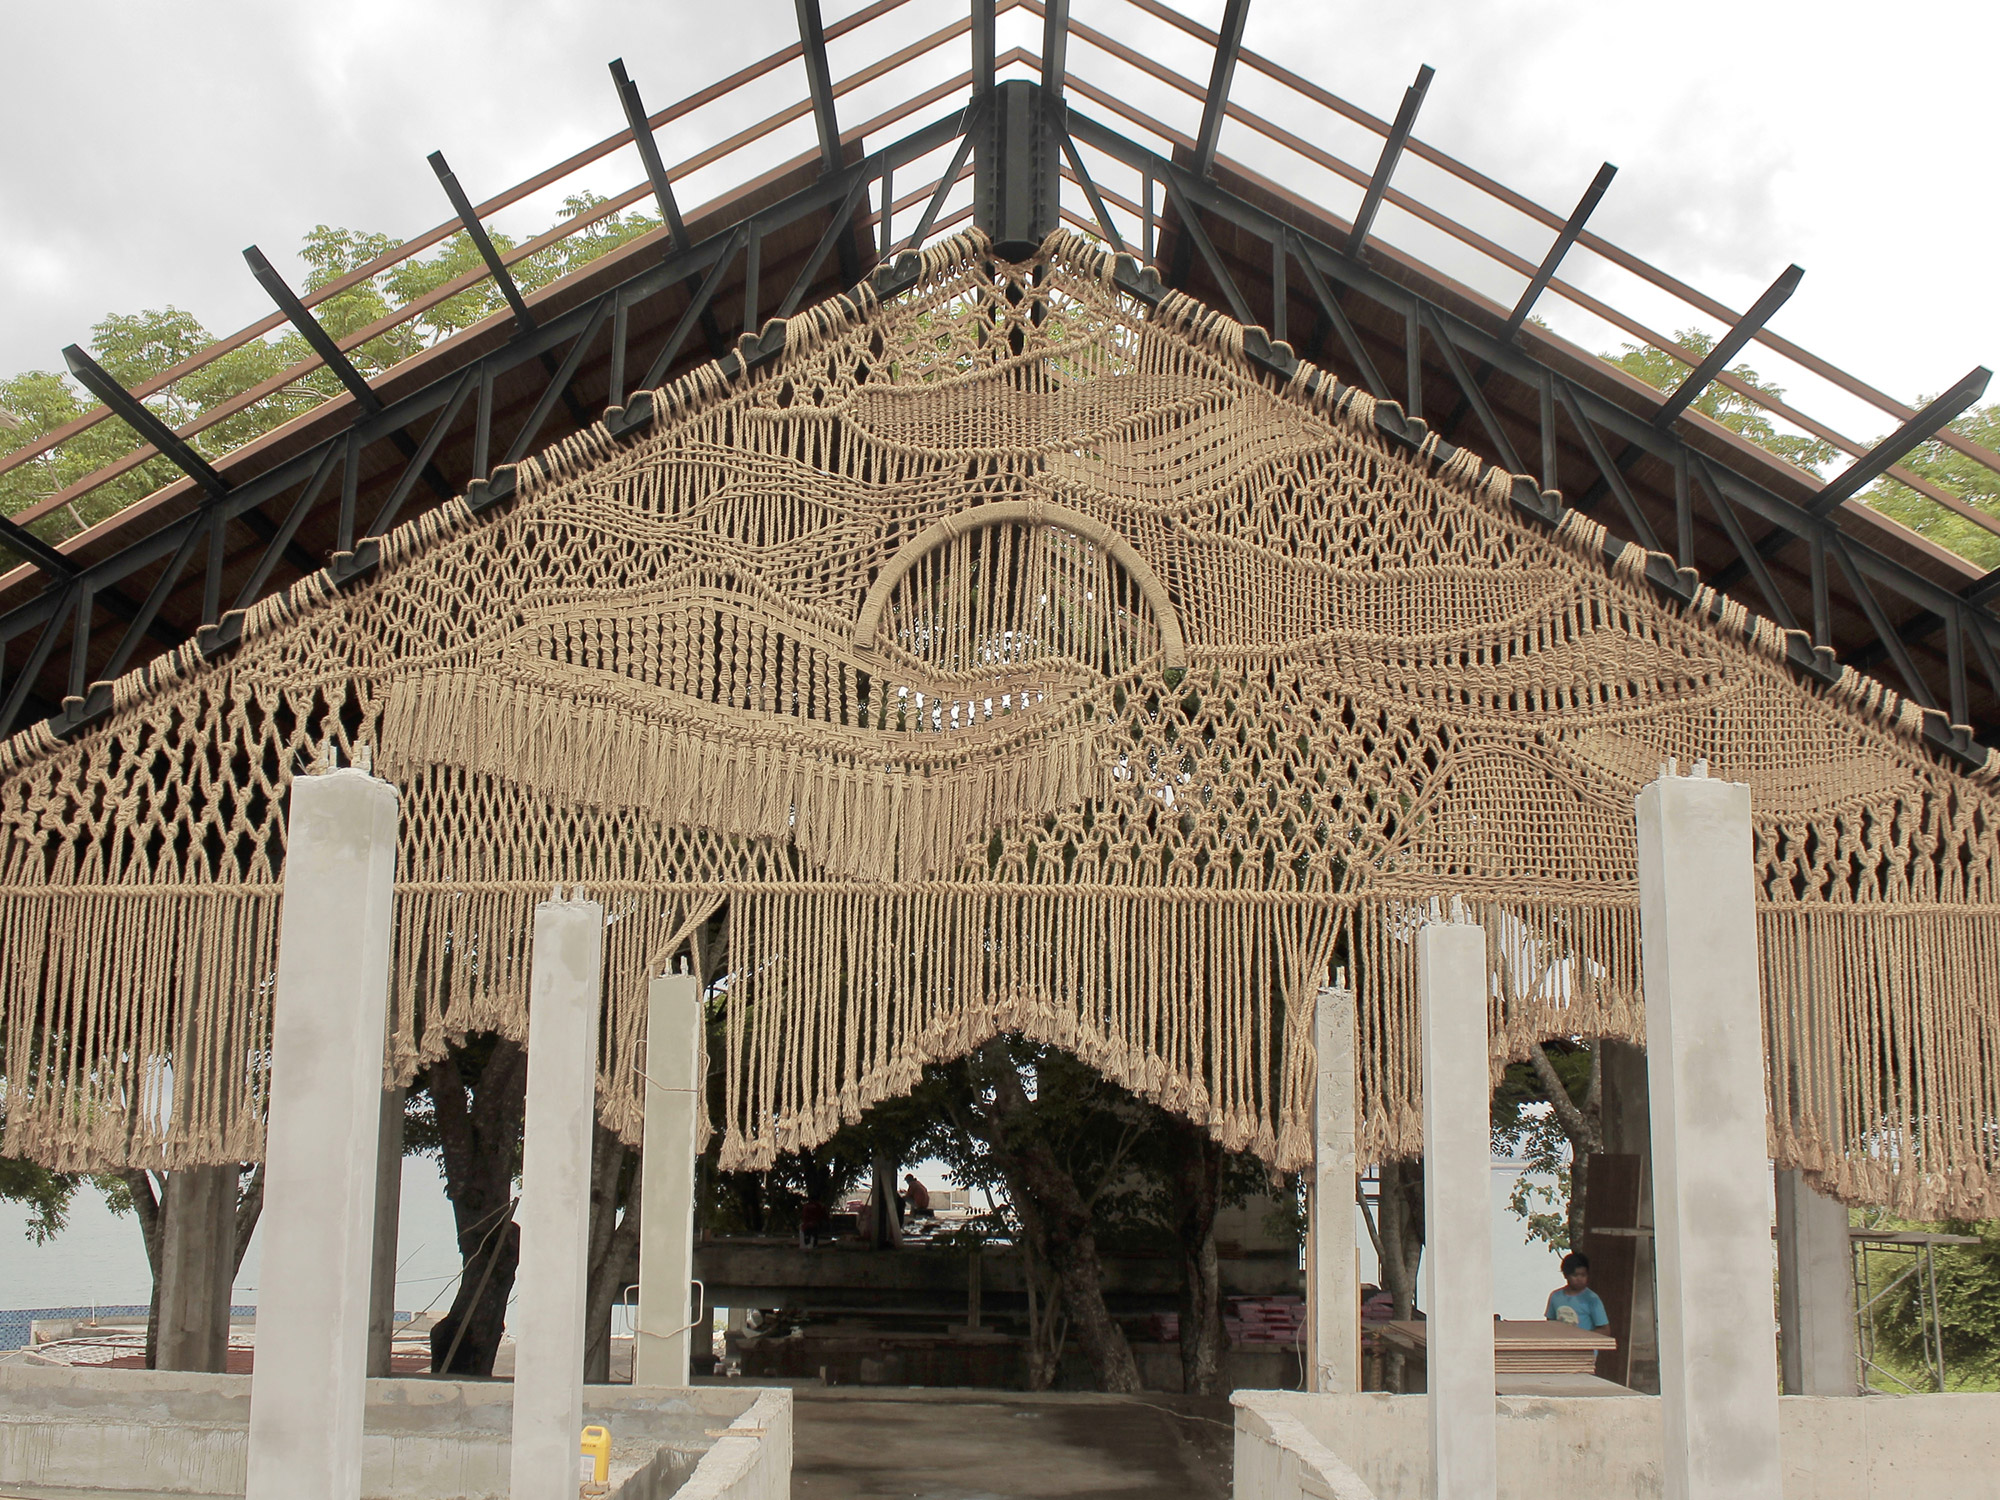 A Trio of Monumental Macramé Installations Stretch 37 Feet Across a Seaside  Structure in Bali | Colossal